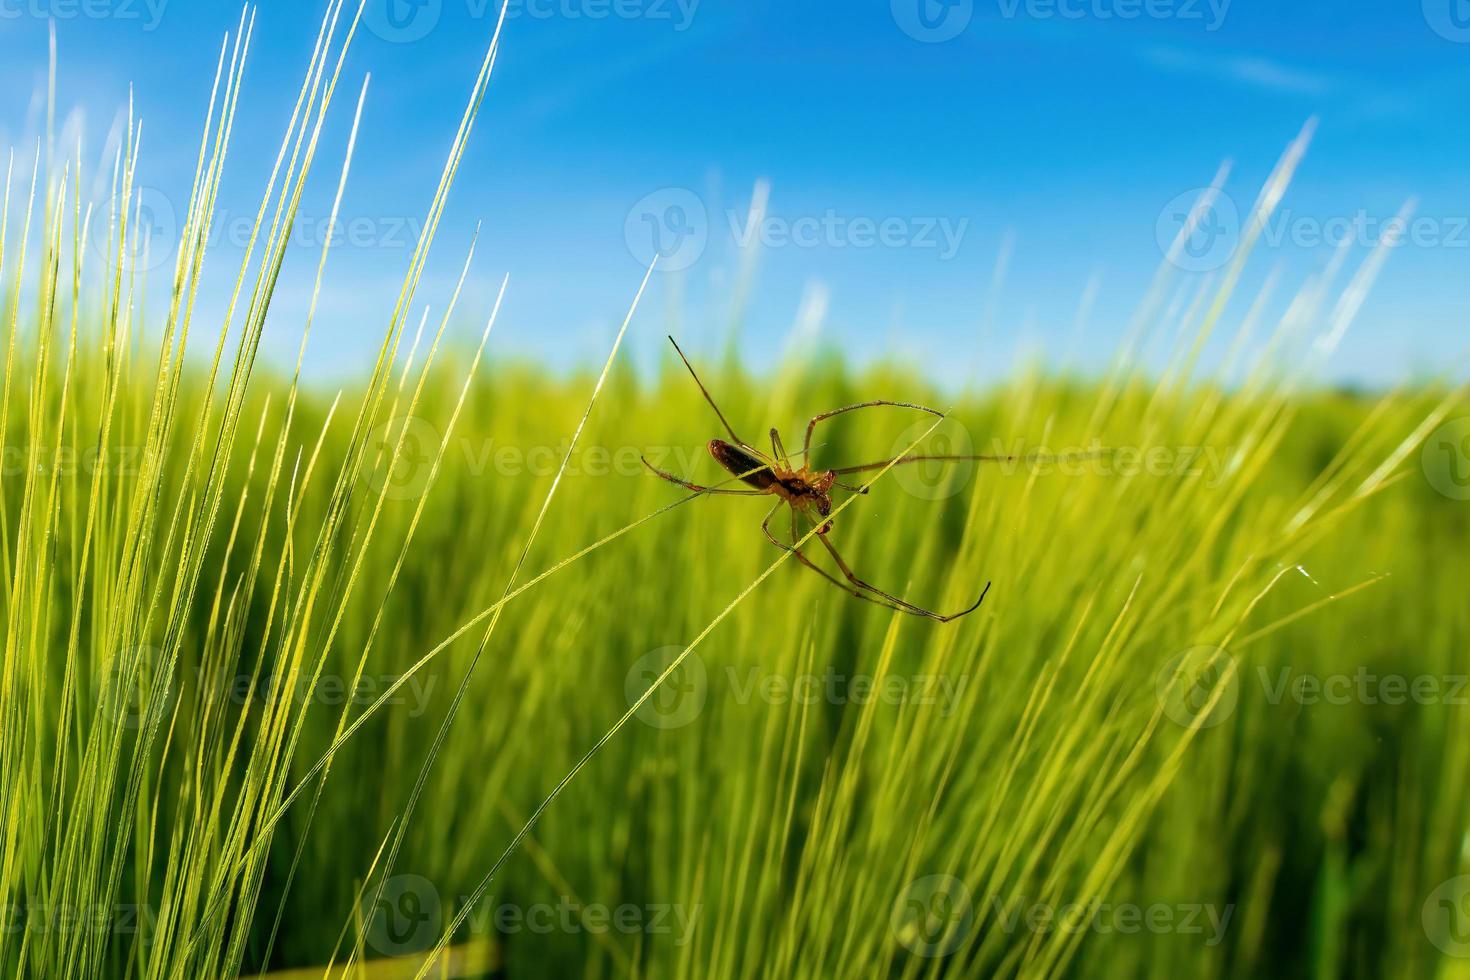 one spider sits in her web in a barley field photo